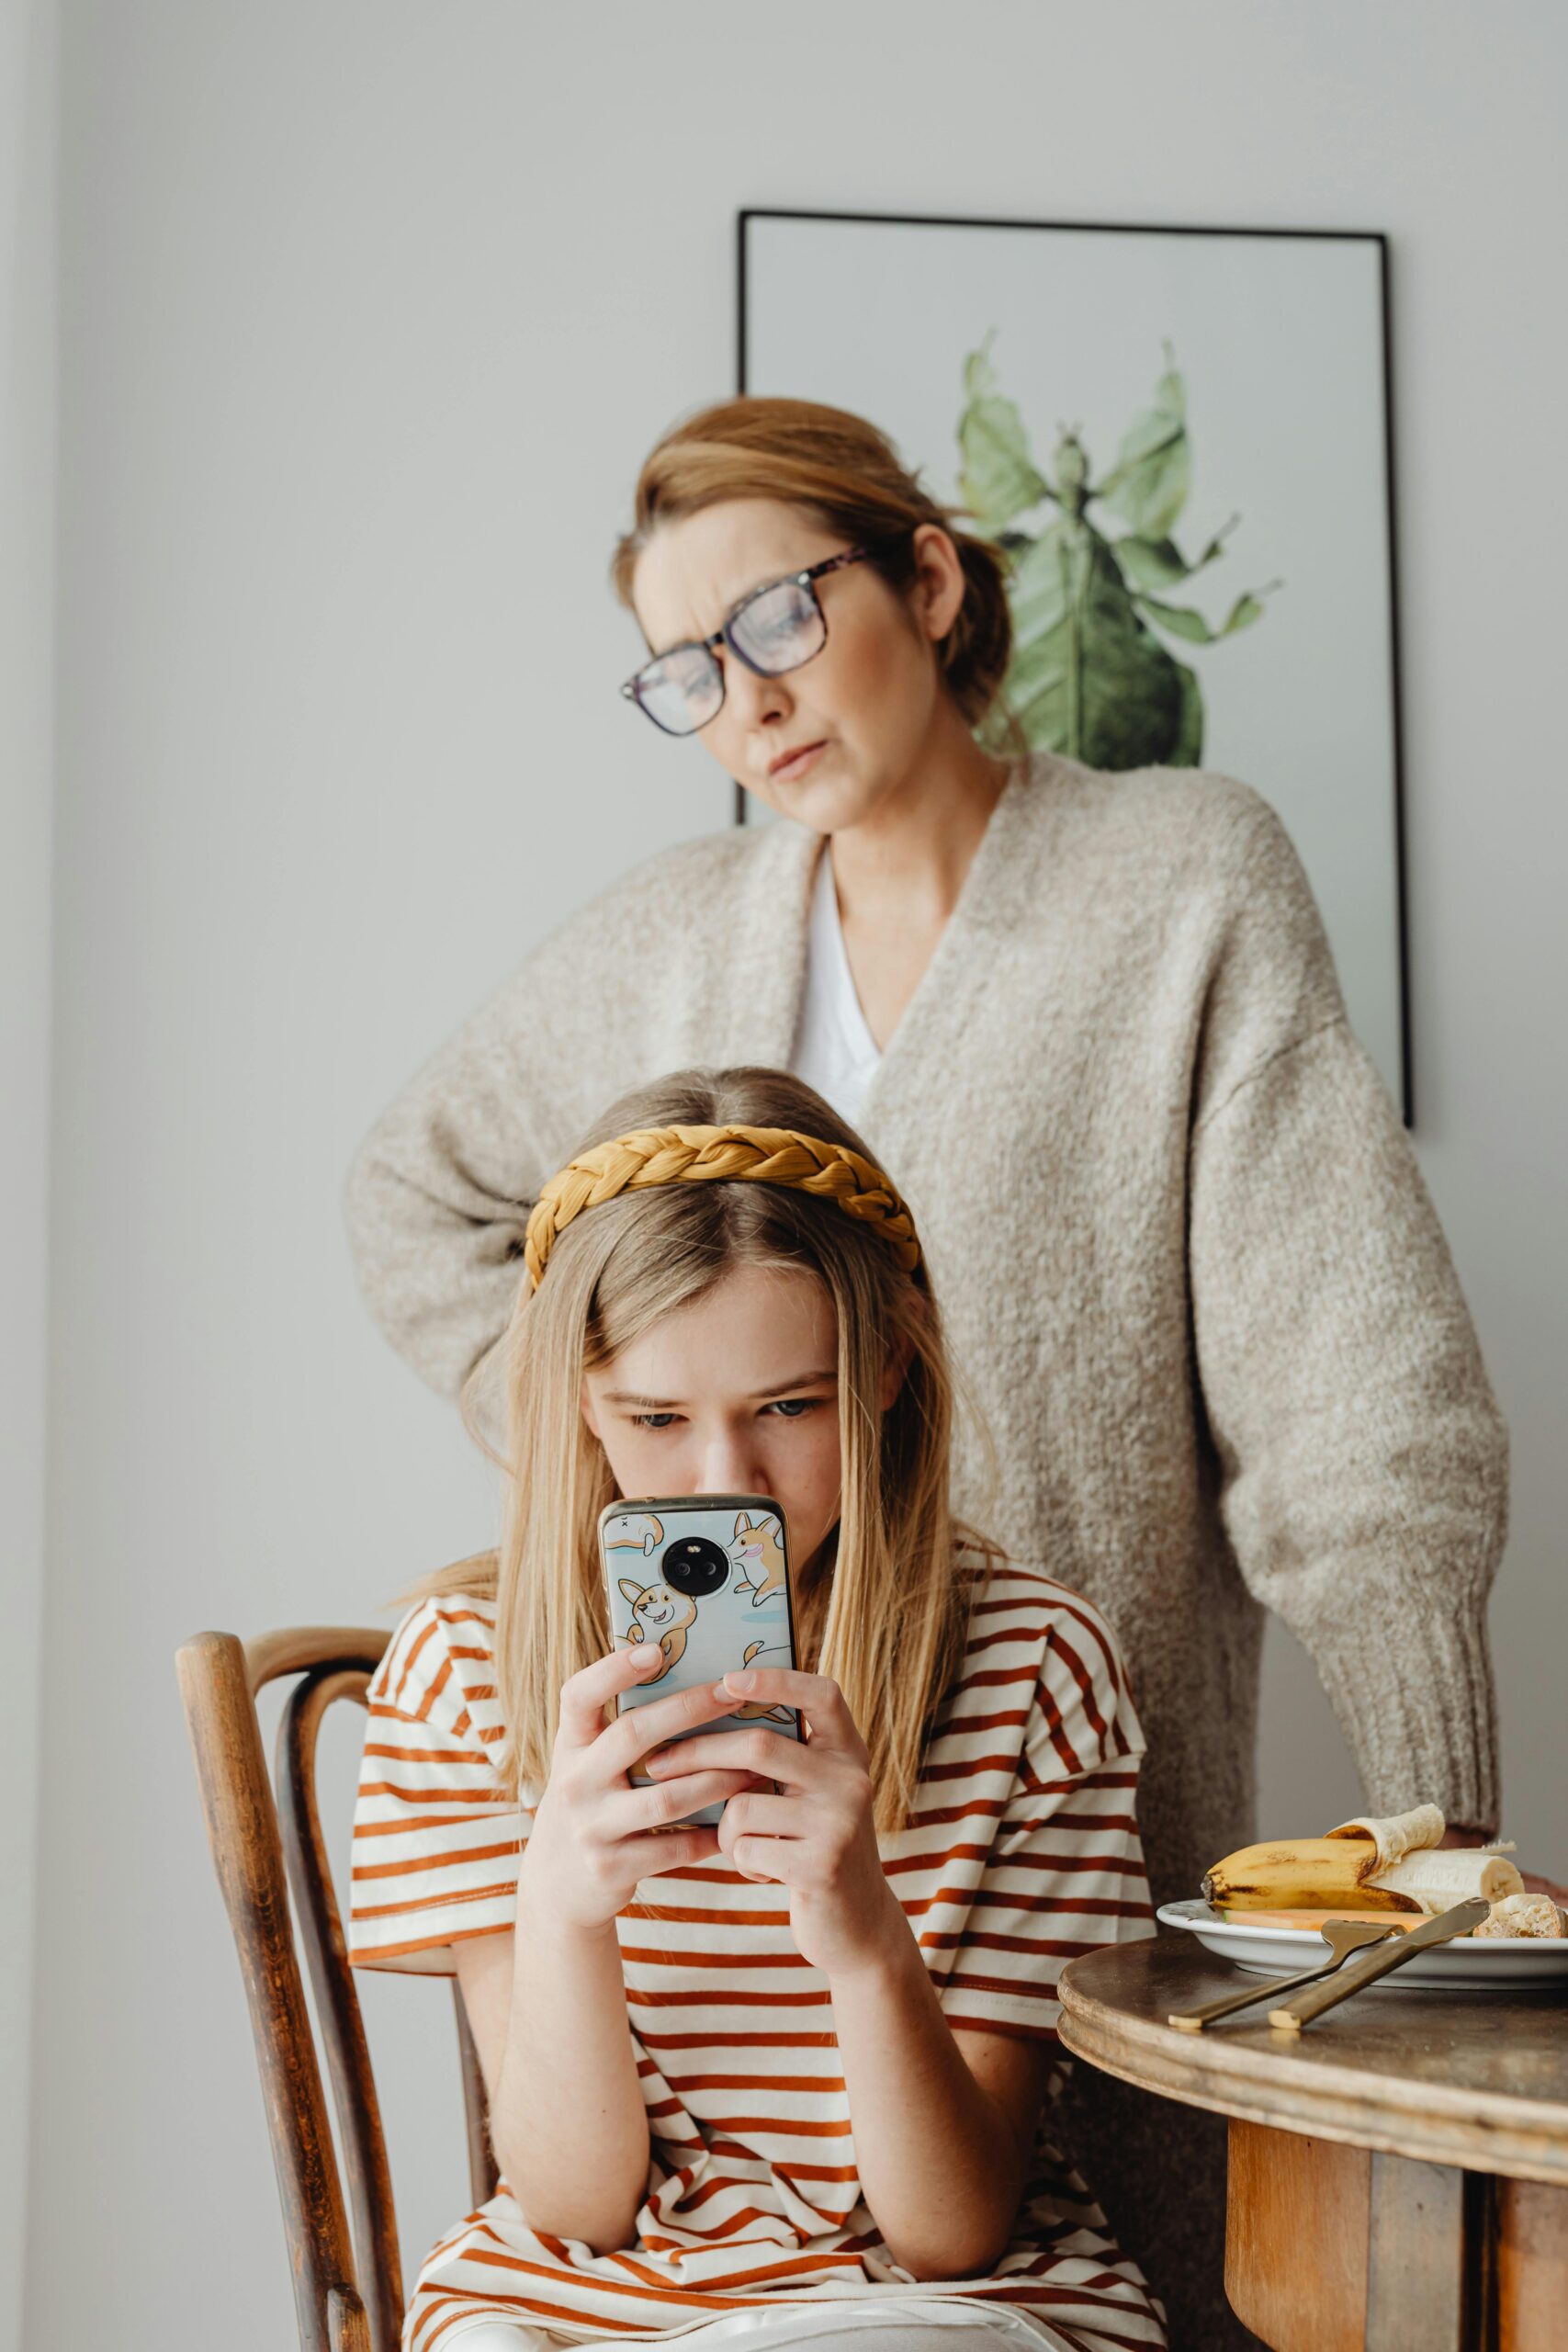 How do I get my child to stop using the phone?